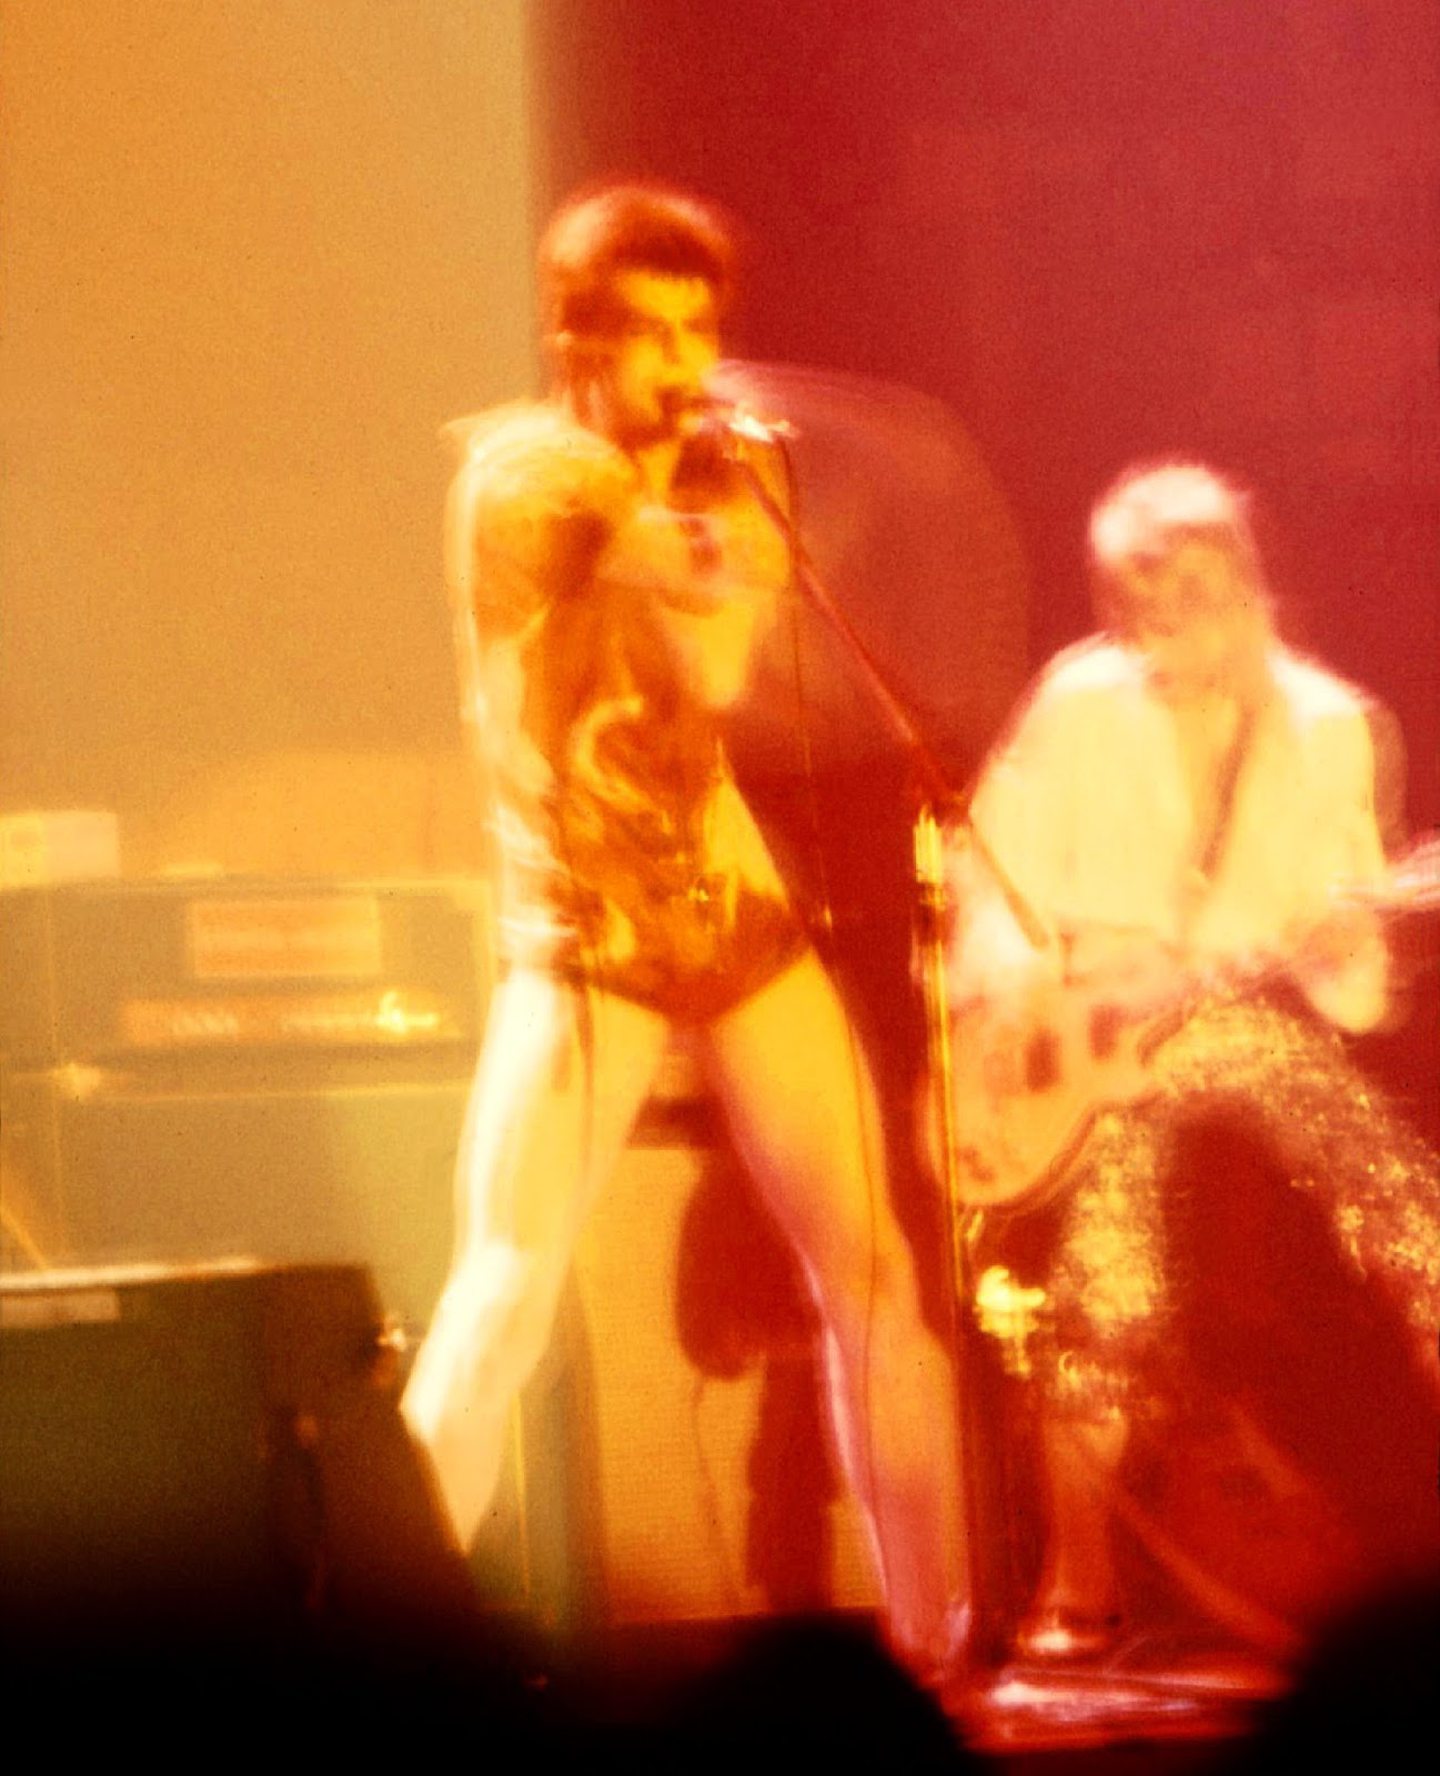 David Bowie performing one of the Caird Hall's most iconic gigs back in 1973. Image: Retro Dundee.